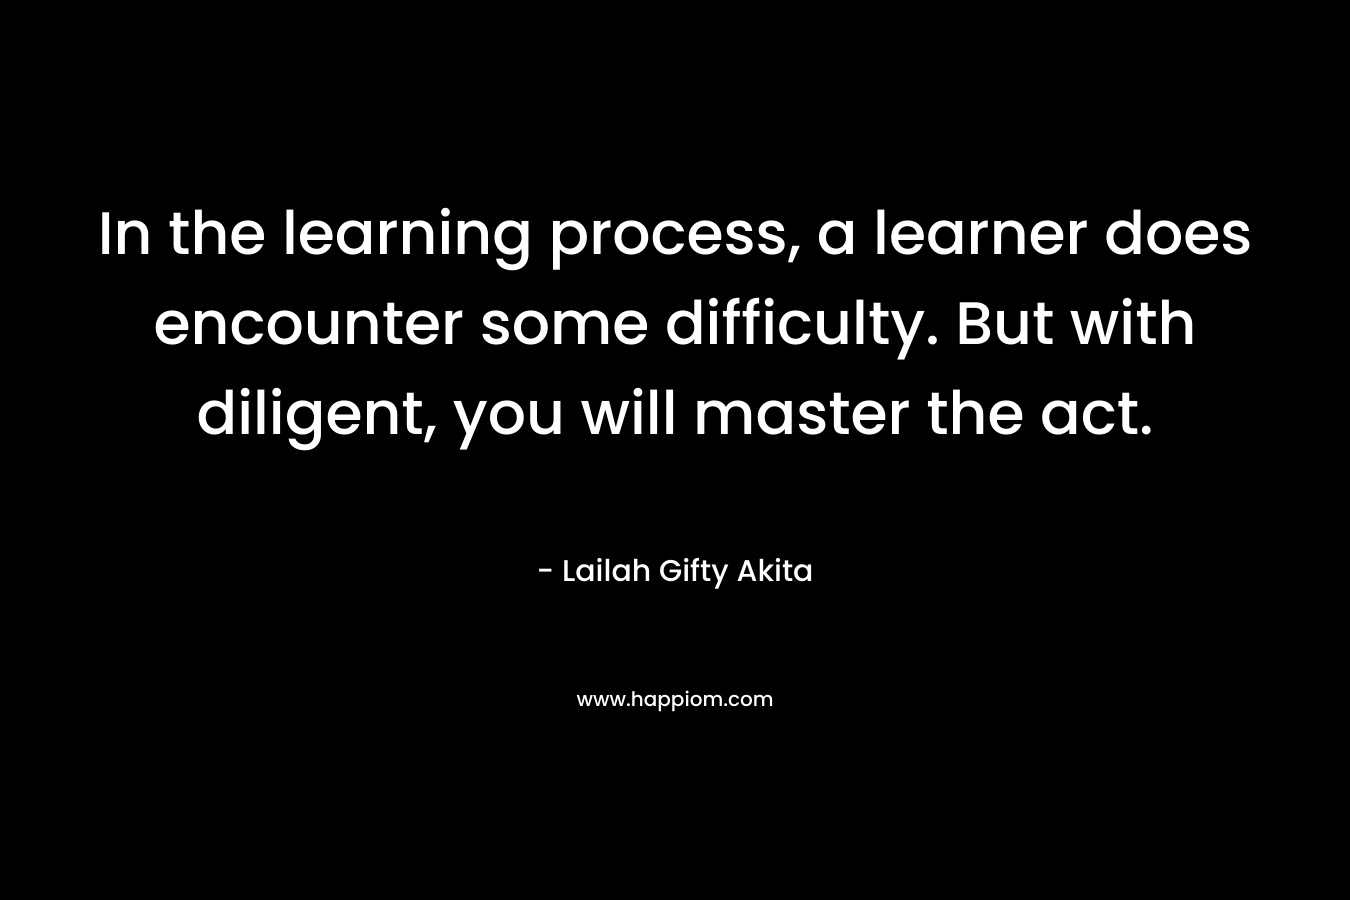 In the learning process, a learner does encounter some difficulty. But with diligent, you will master the act.